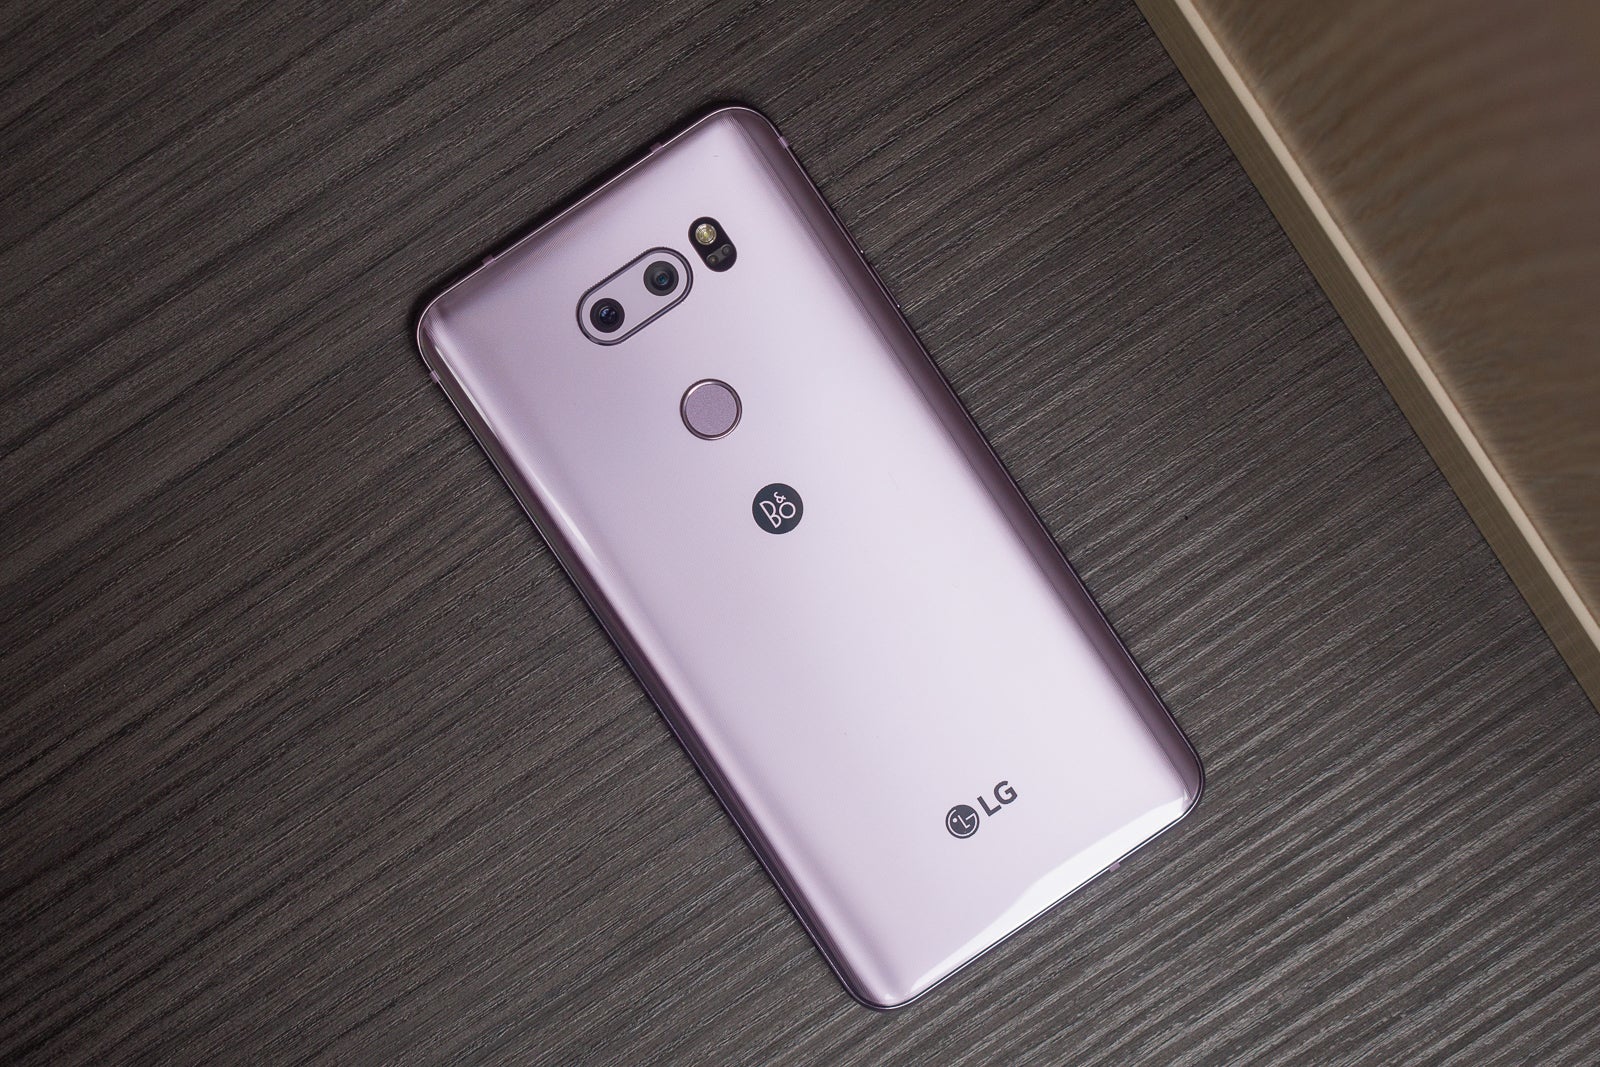 LG rolls out Android Oreo beta for V30 and V30+